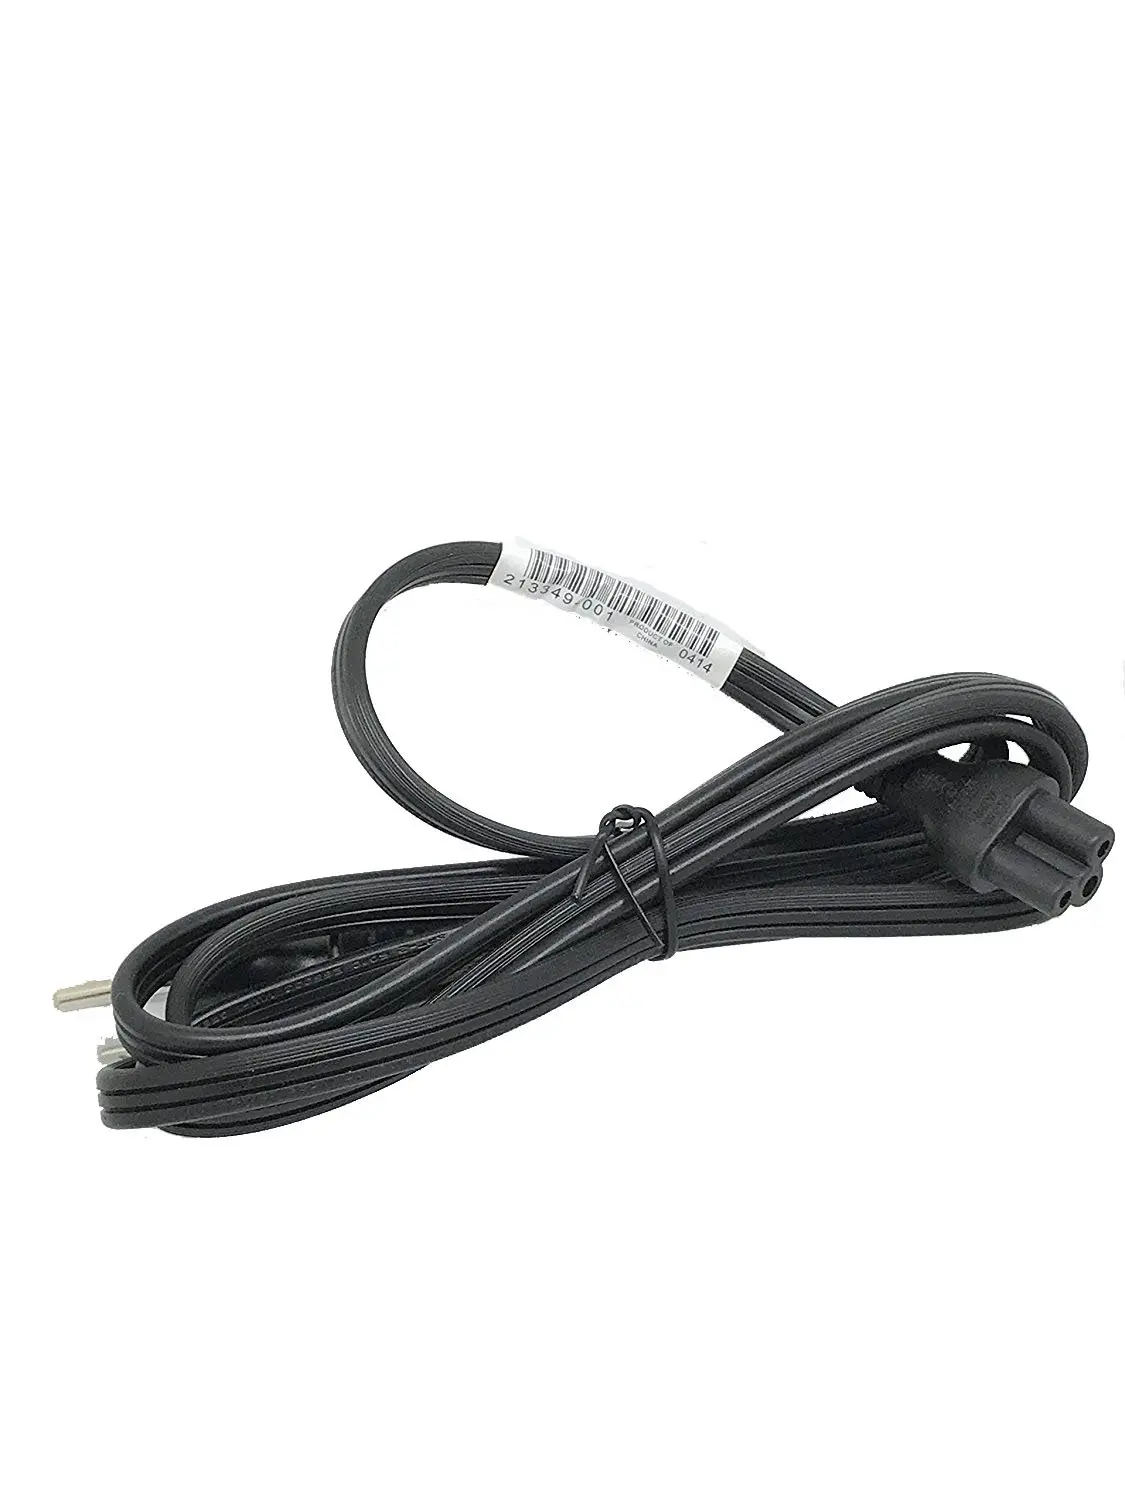 cnc846qwgf hewlett packard cords - How do you know if a power cord is compatible